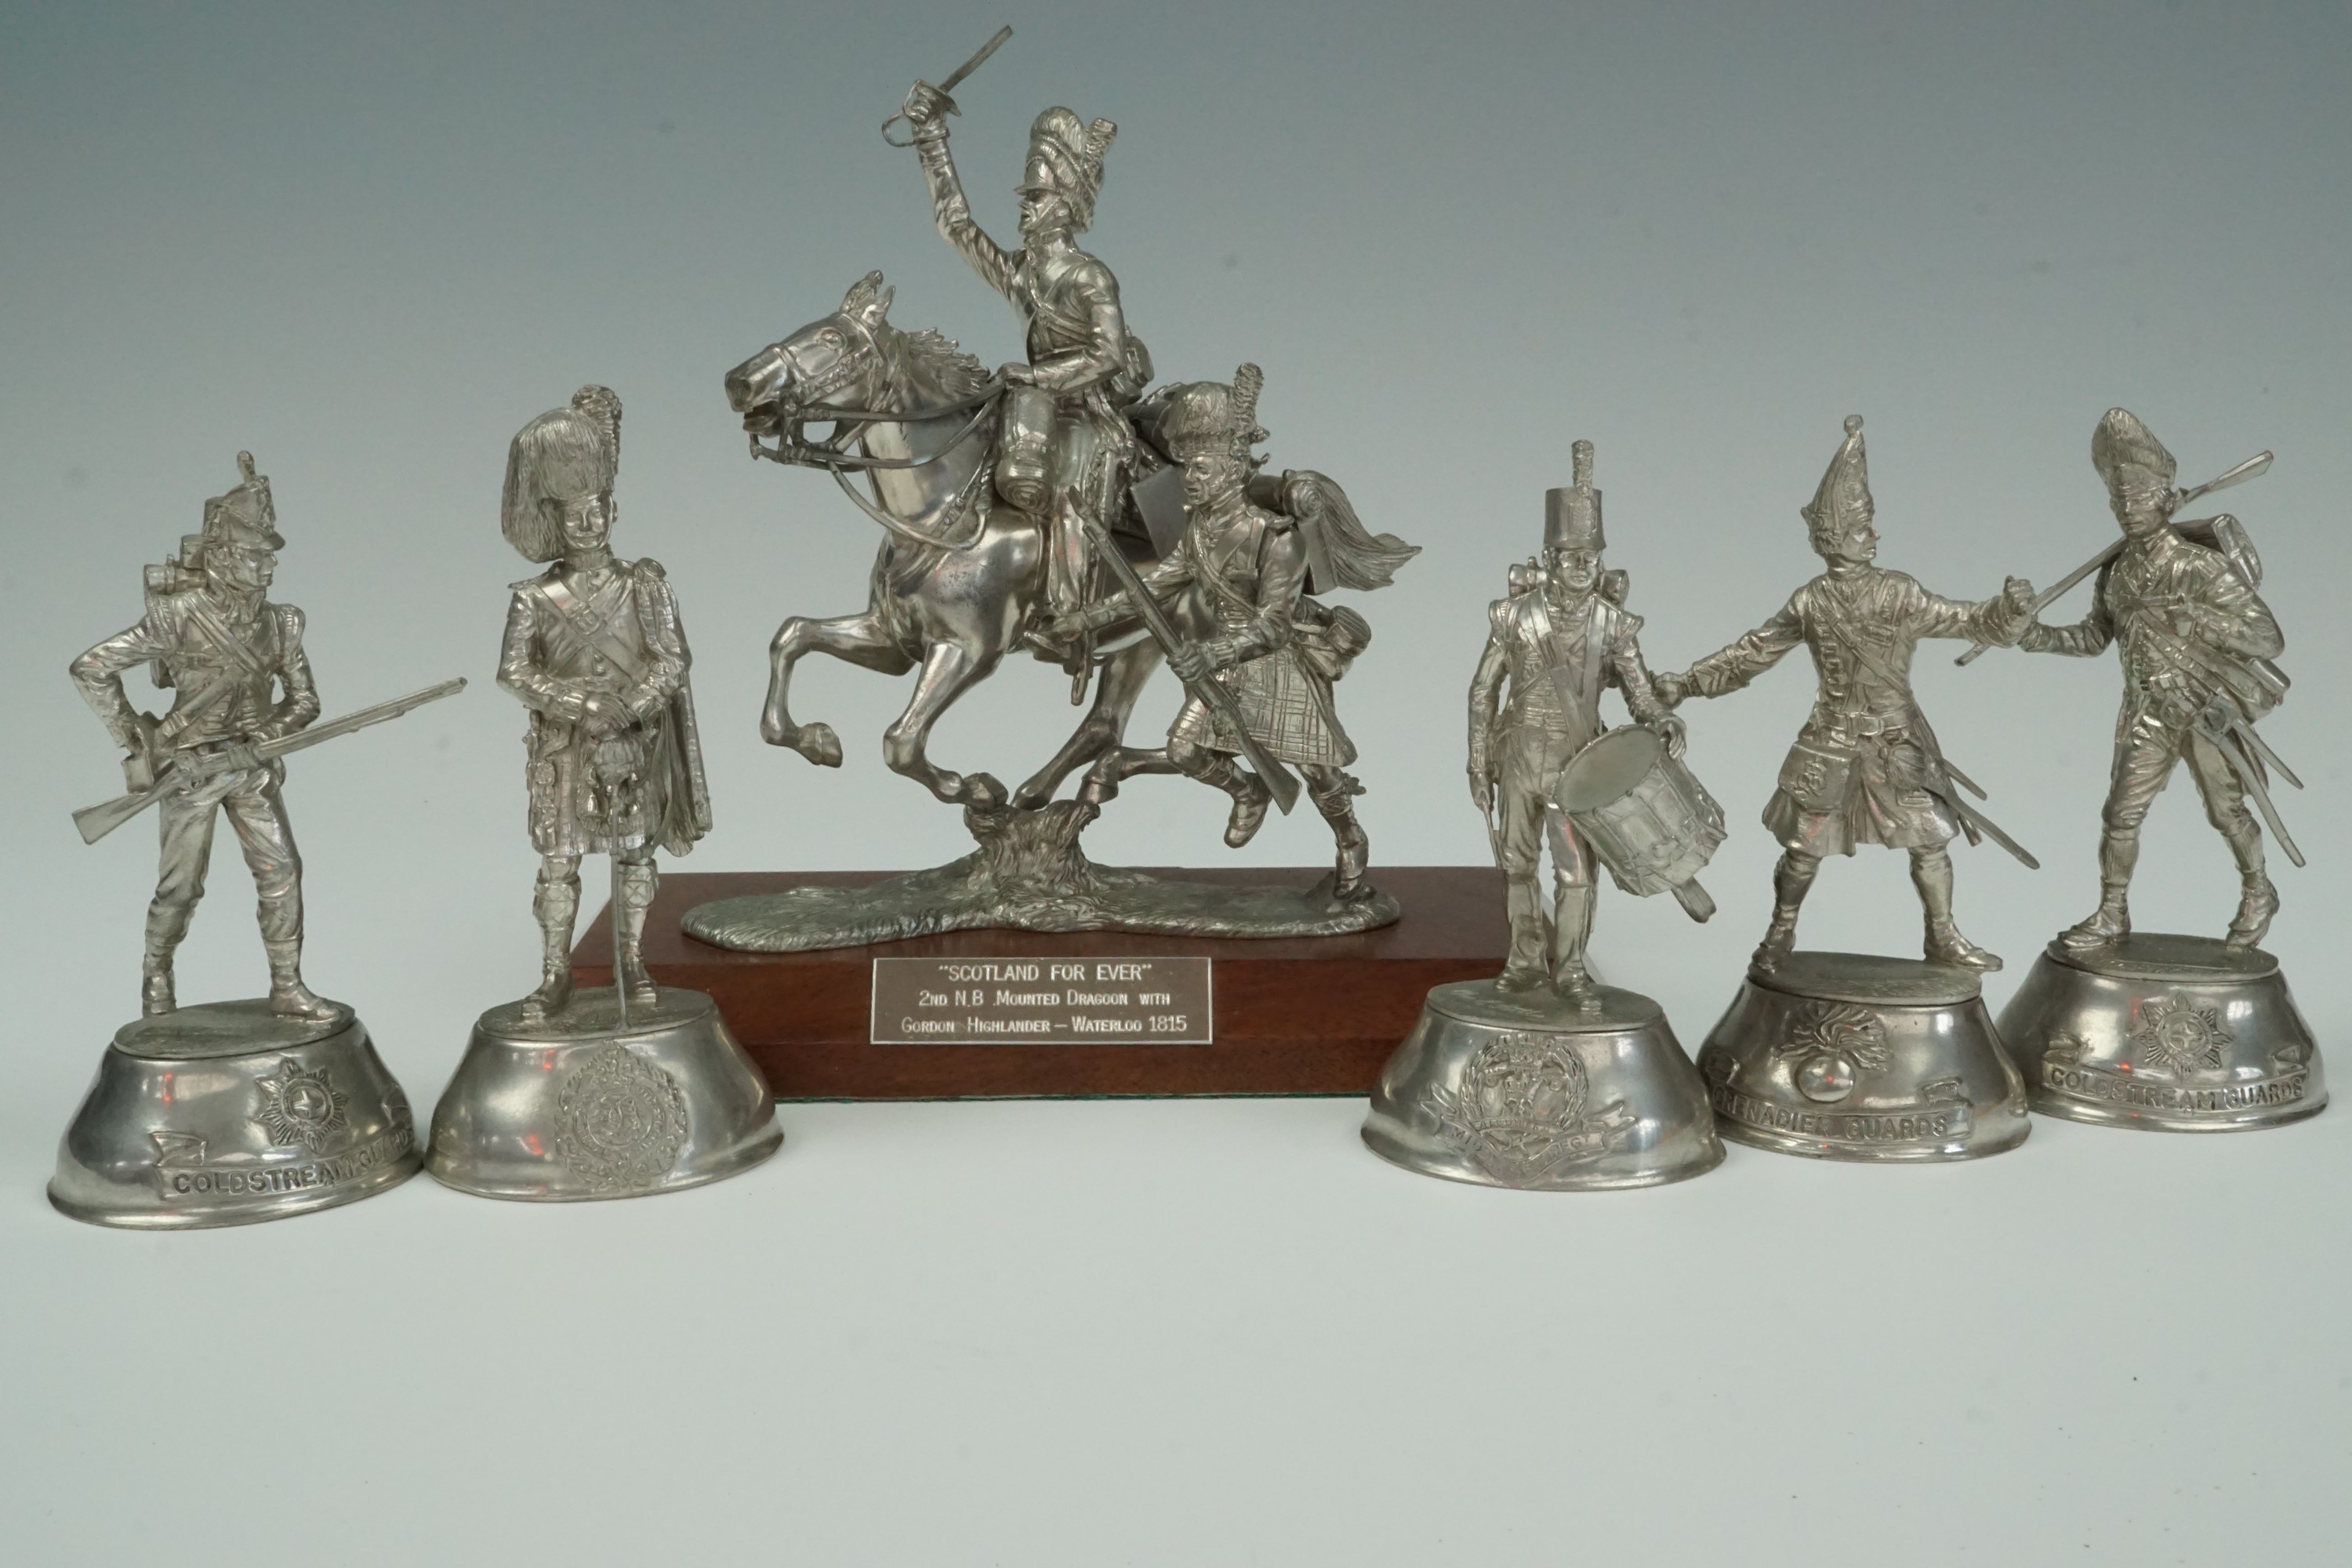 Five Charles C Stadden for Buckingham Pewter sculptures of 18th - 19th Century British soldiers,